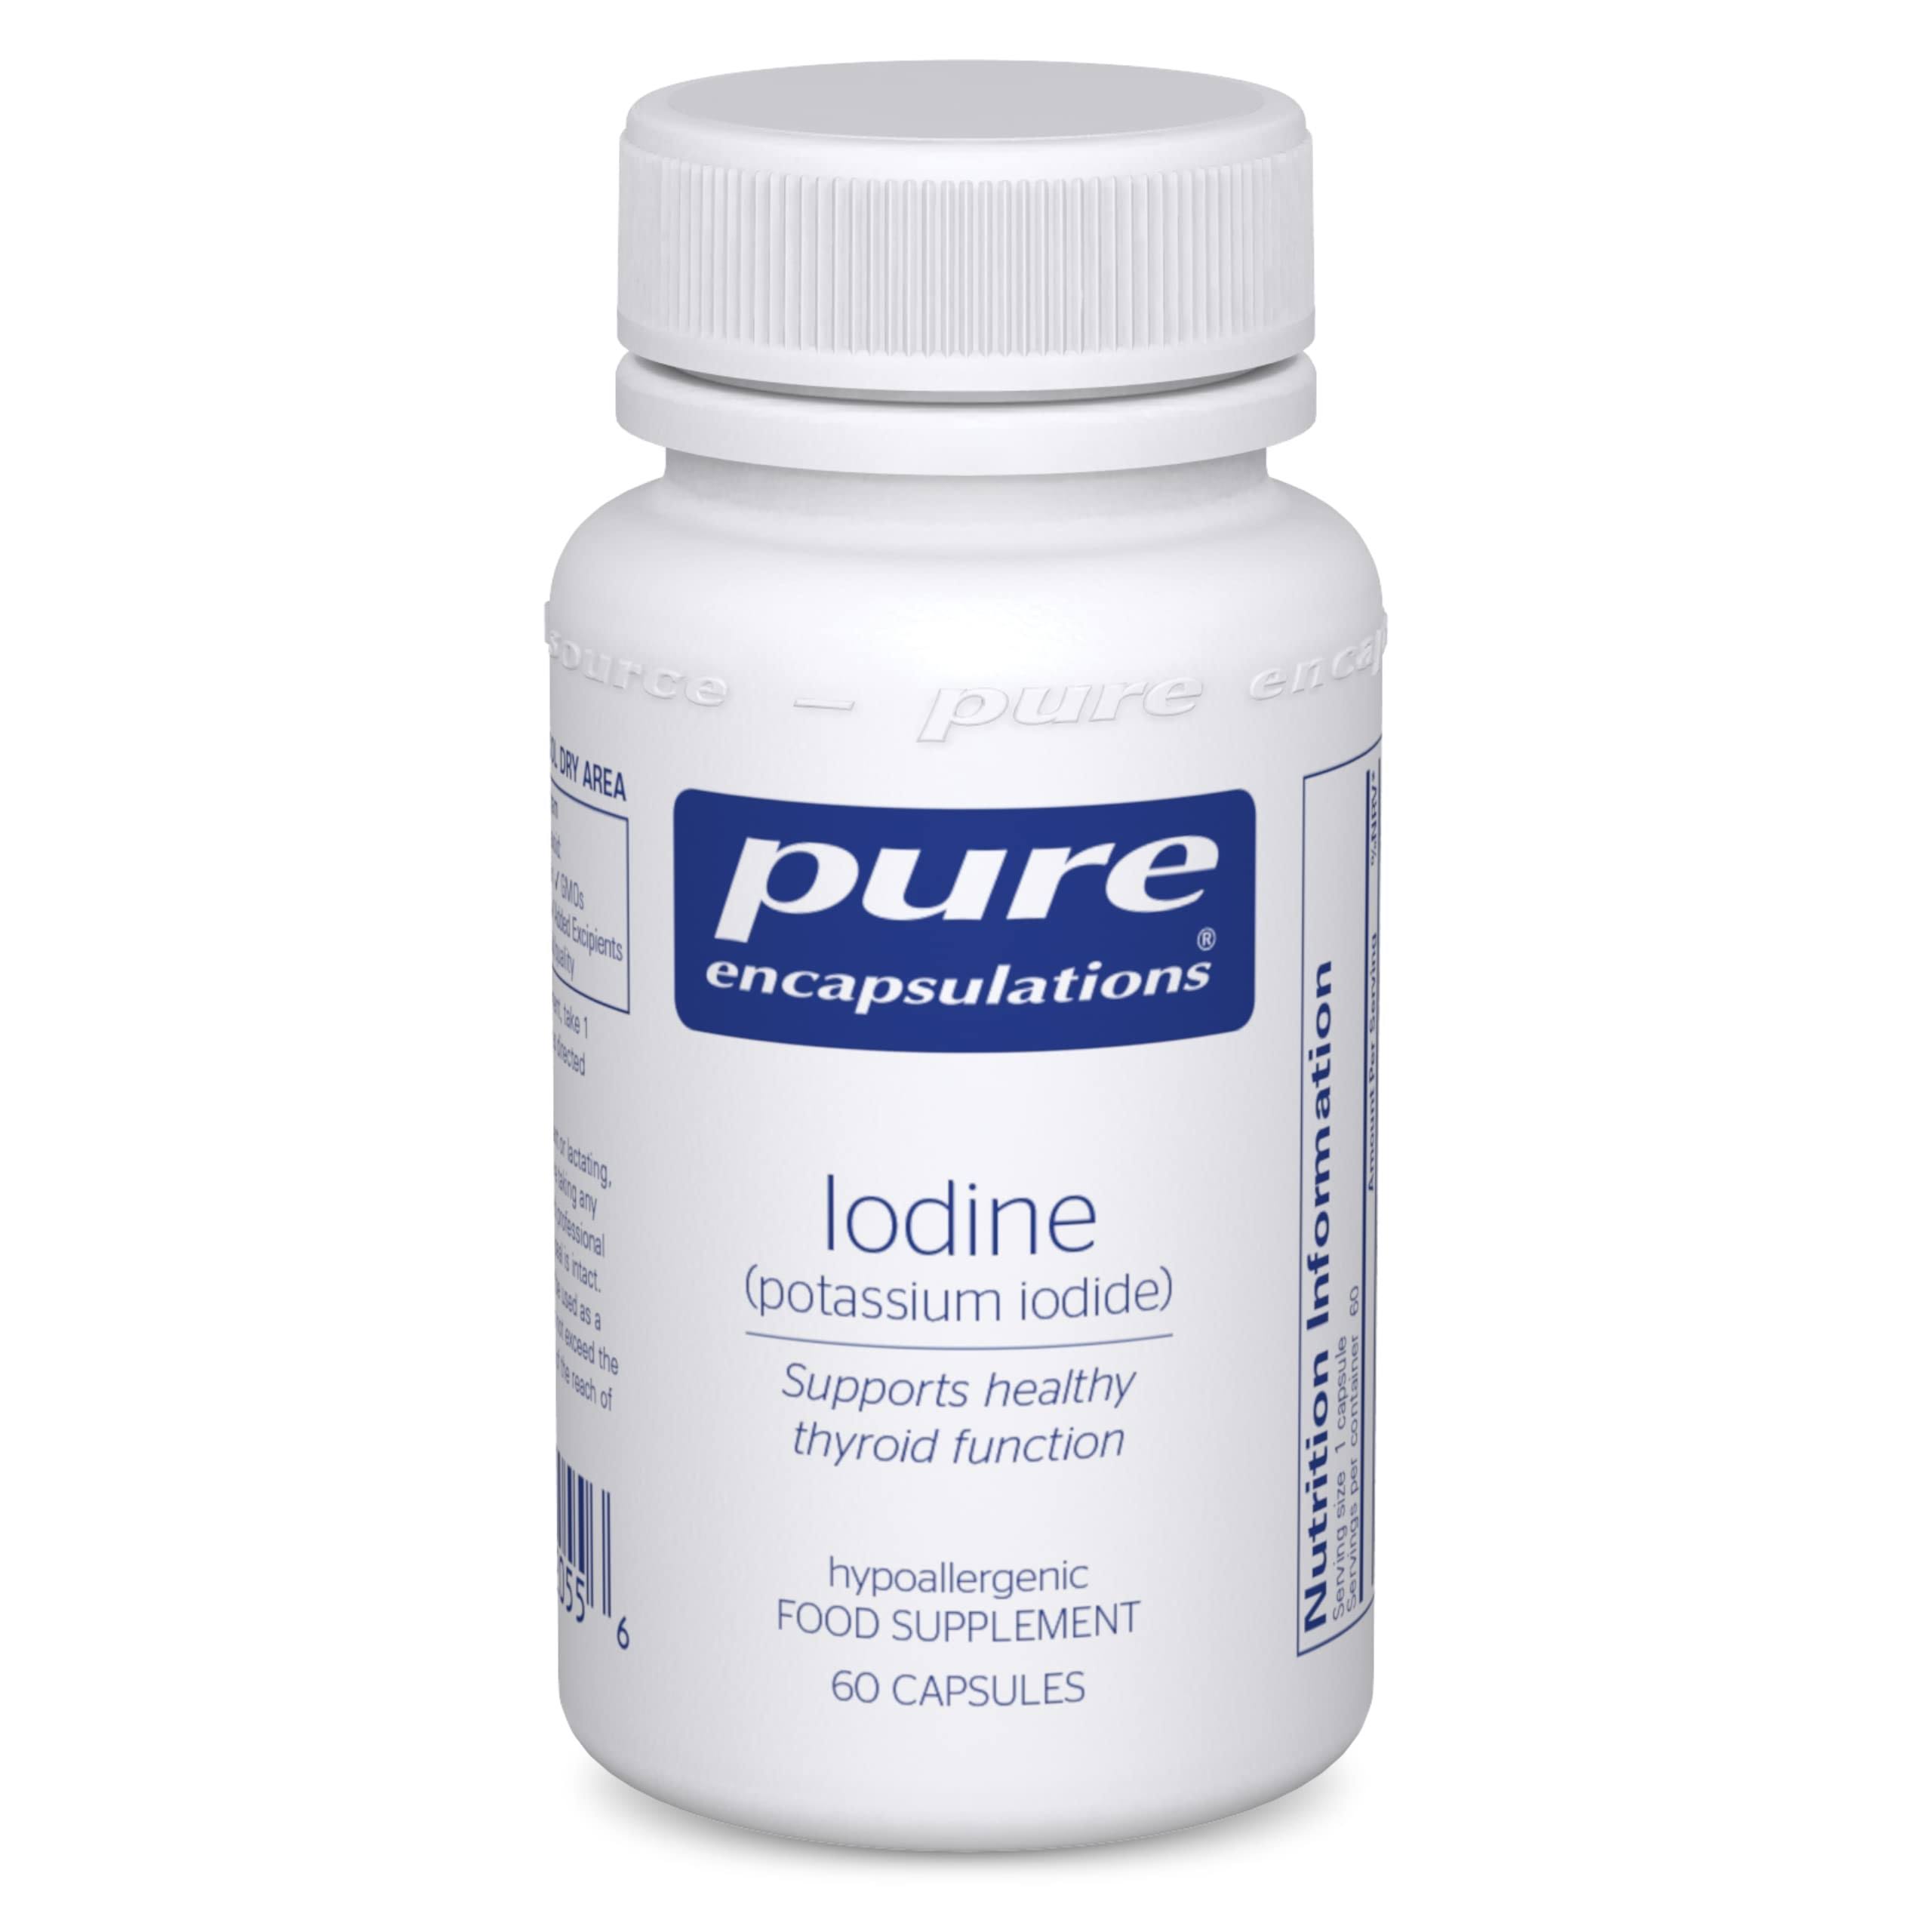 Pure Encapsulations - Iodine (Potassium Iodide) 225 UG - Hypoallergenic Supplement Supports Metabolism, Healthy Skin and Thyroid Function - 60